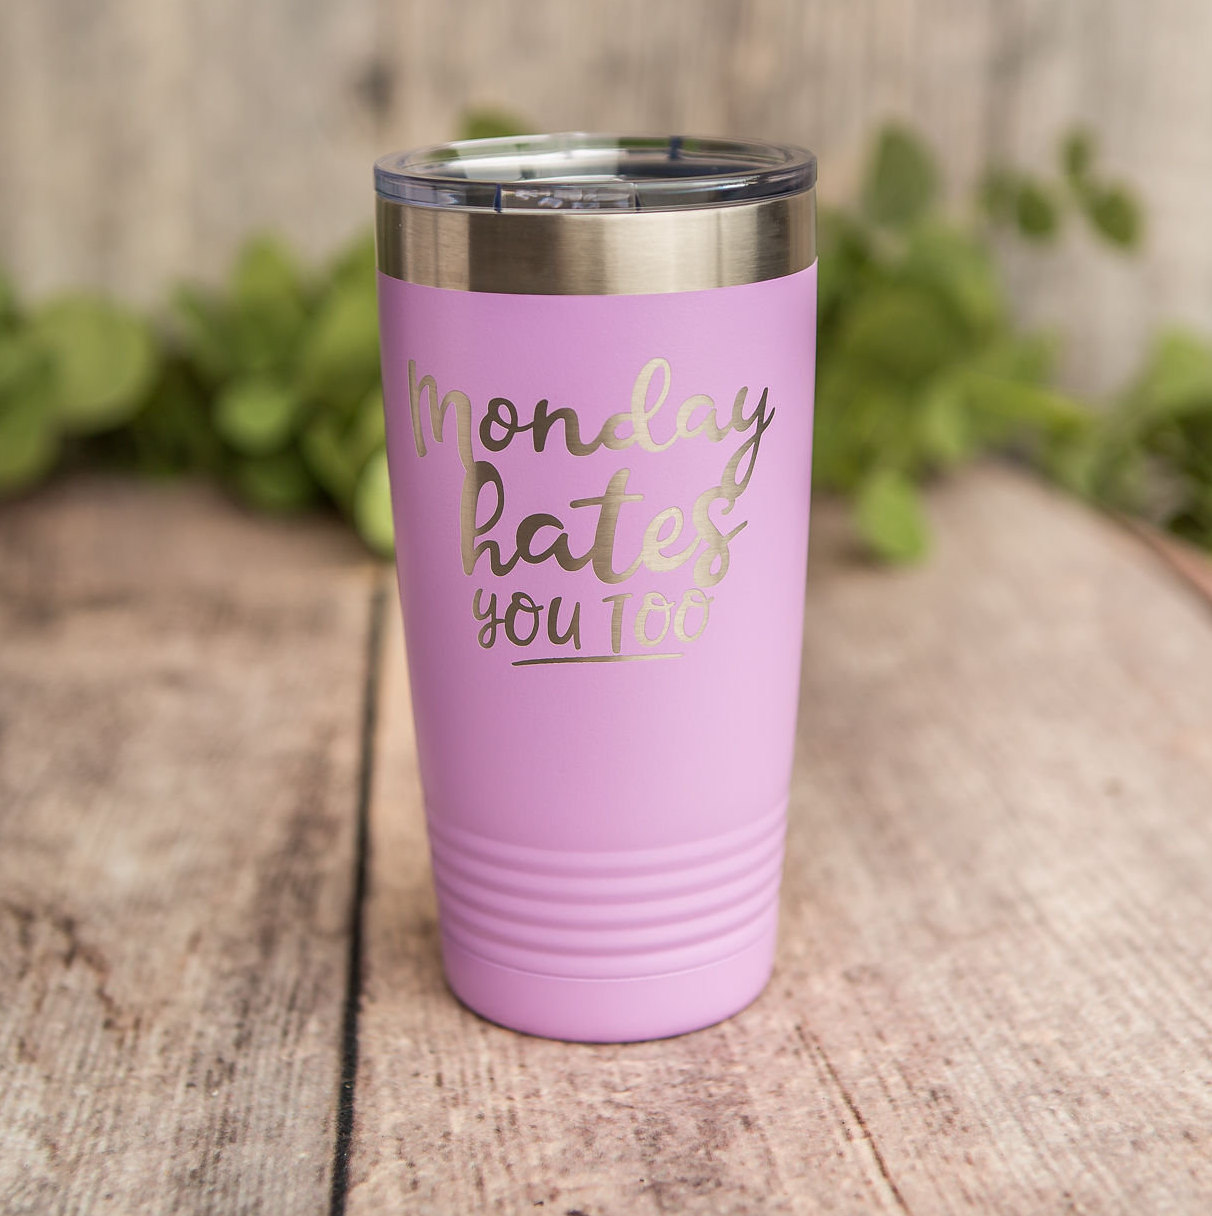 https://3cetching.com/wp-content/uploads/2020/09/monday-hates-you-too-engraved-polar-camel-stainless-steel-tumbler-yeti-style-cup-funny-mug-cup-5f5faf72.jpg